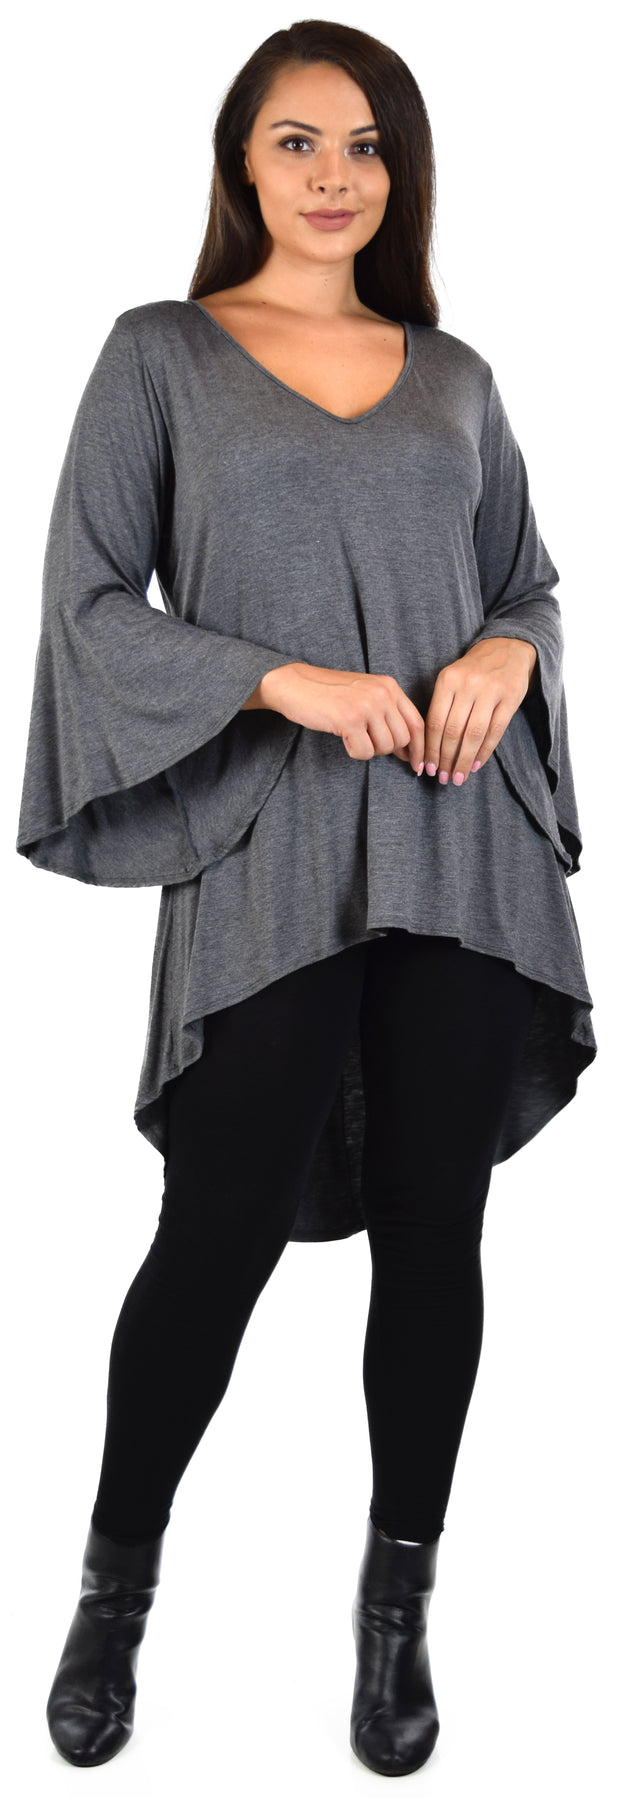 Women Plus Size High Low Bell Sleeve Gothic Blouse Tunic Top